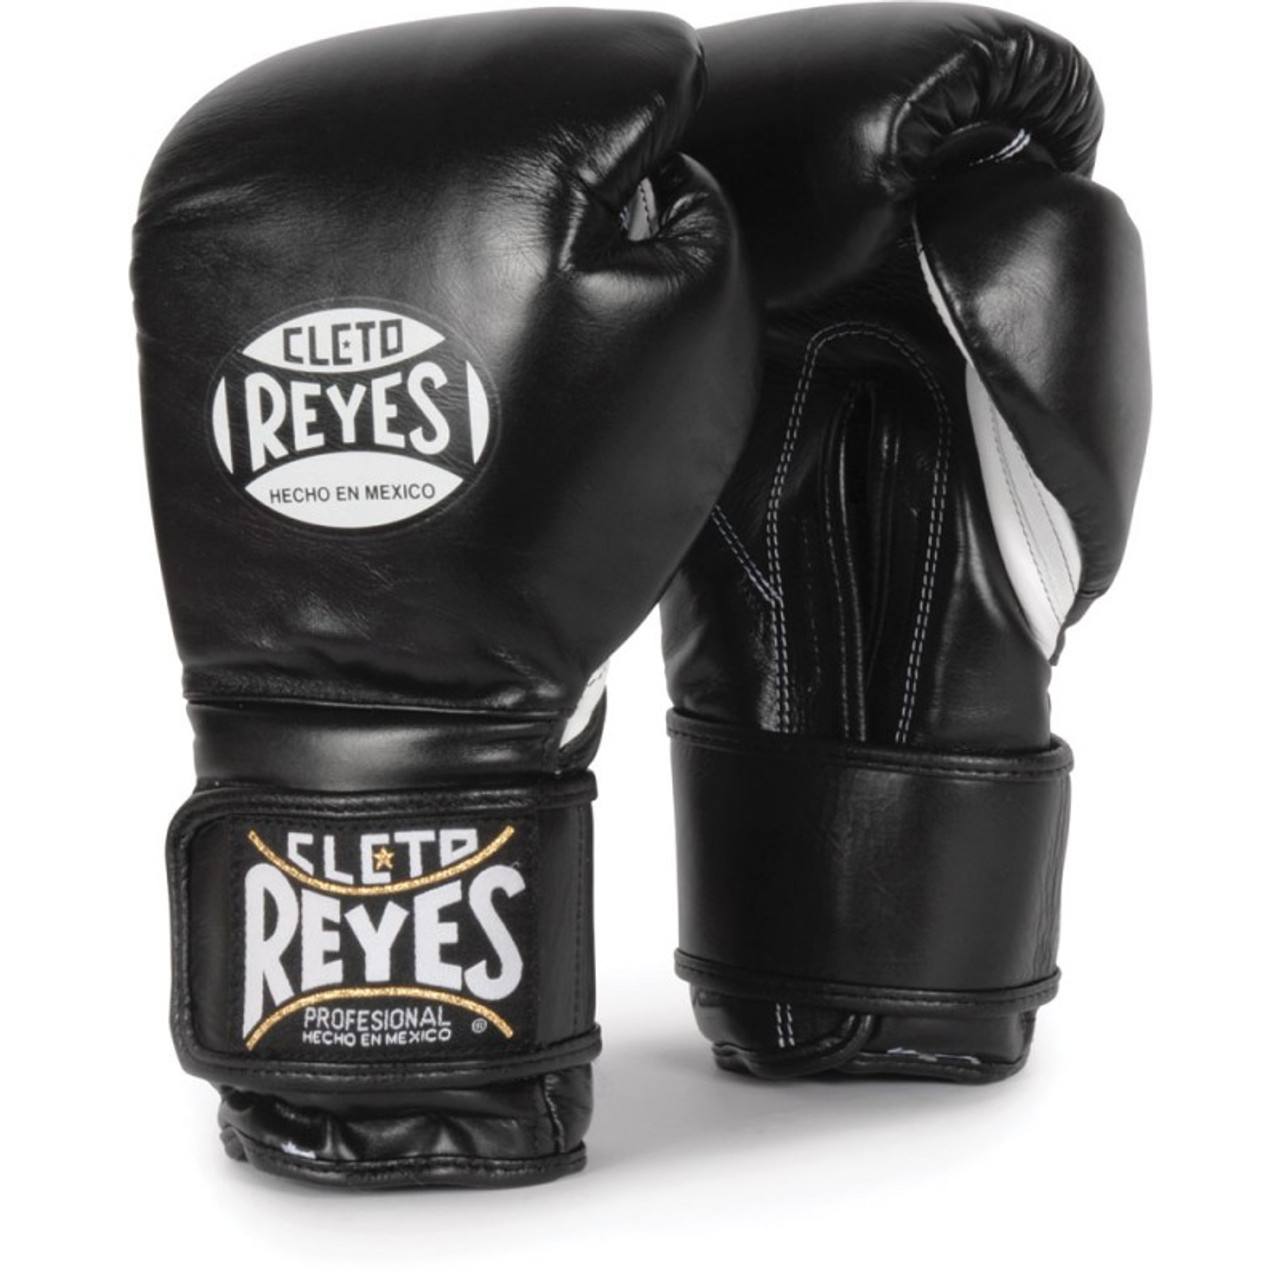 Professional Boxing Gloves Cleto Reyes